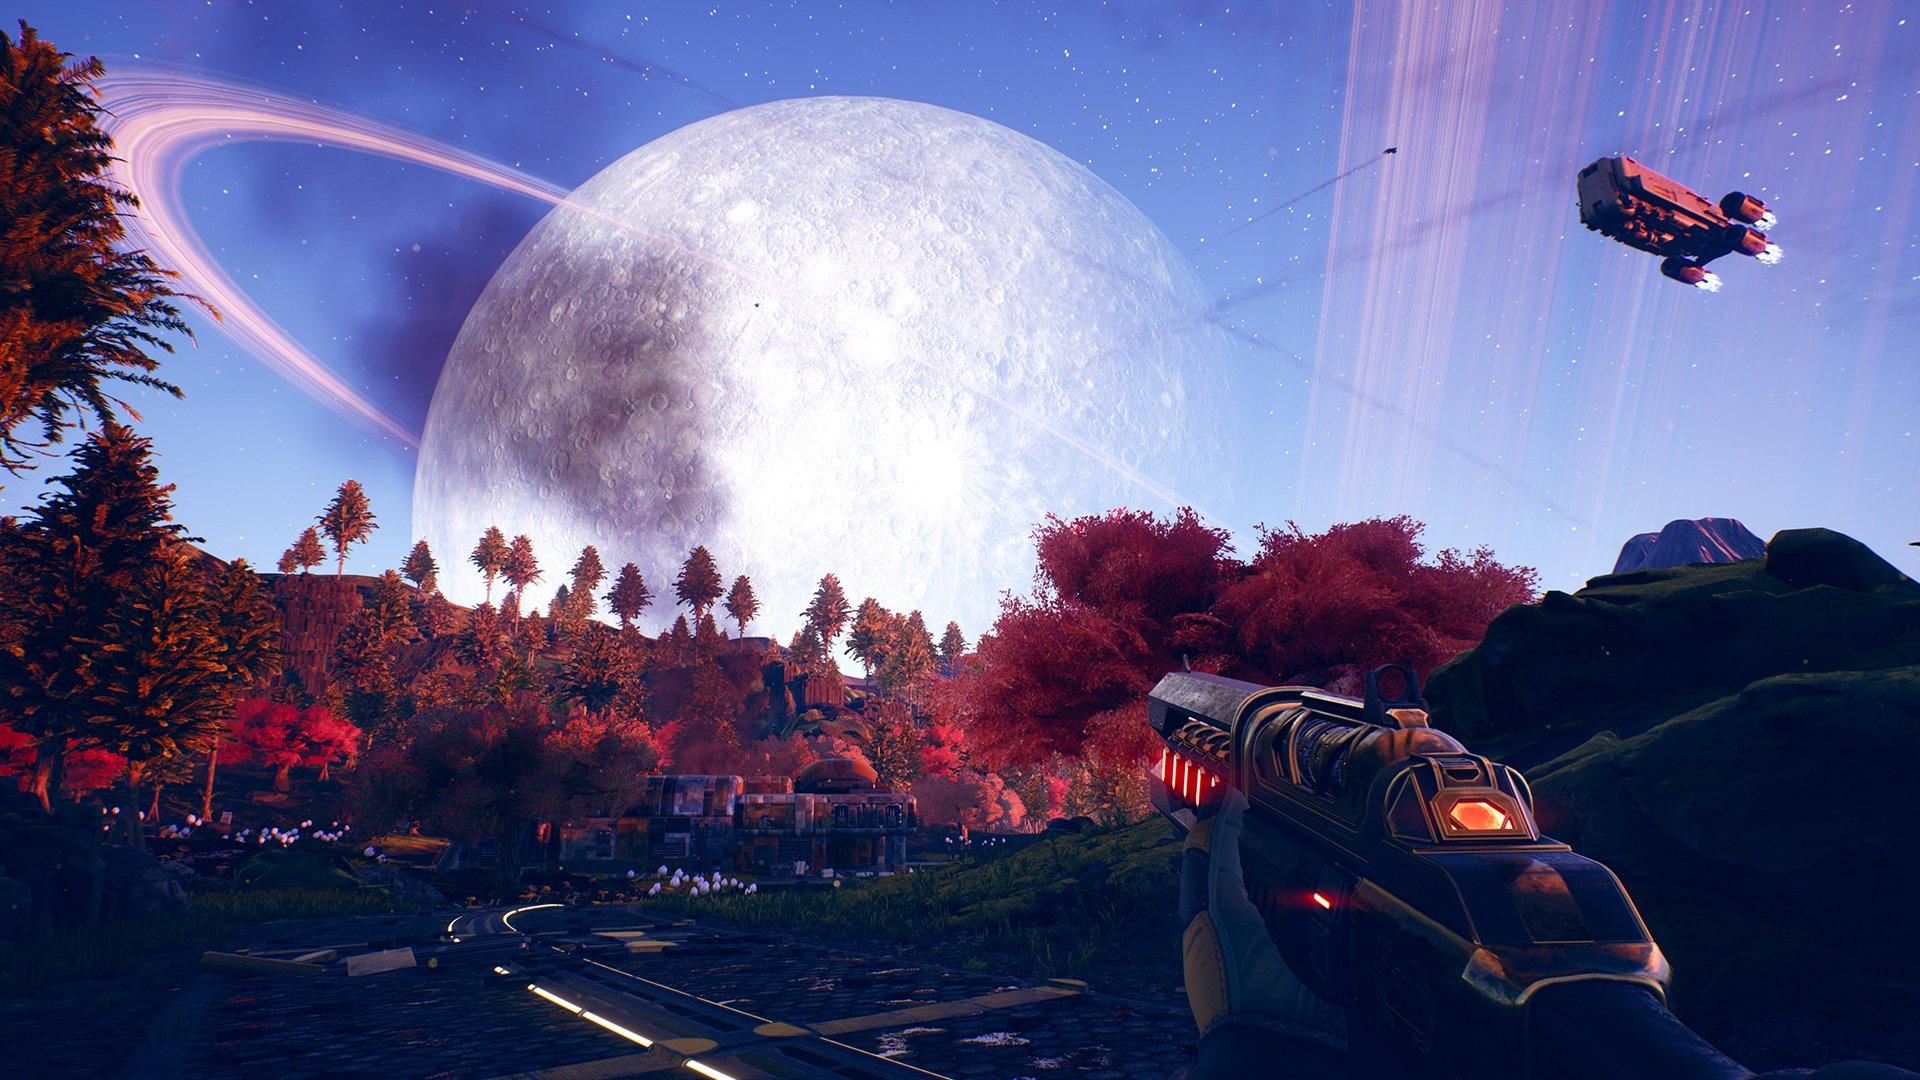 Buy The Outer Worlds (PS4) from £11.99 (Today) – Best Deals on